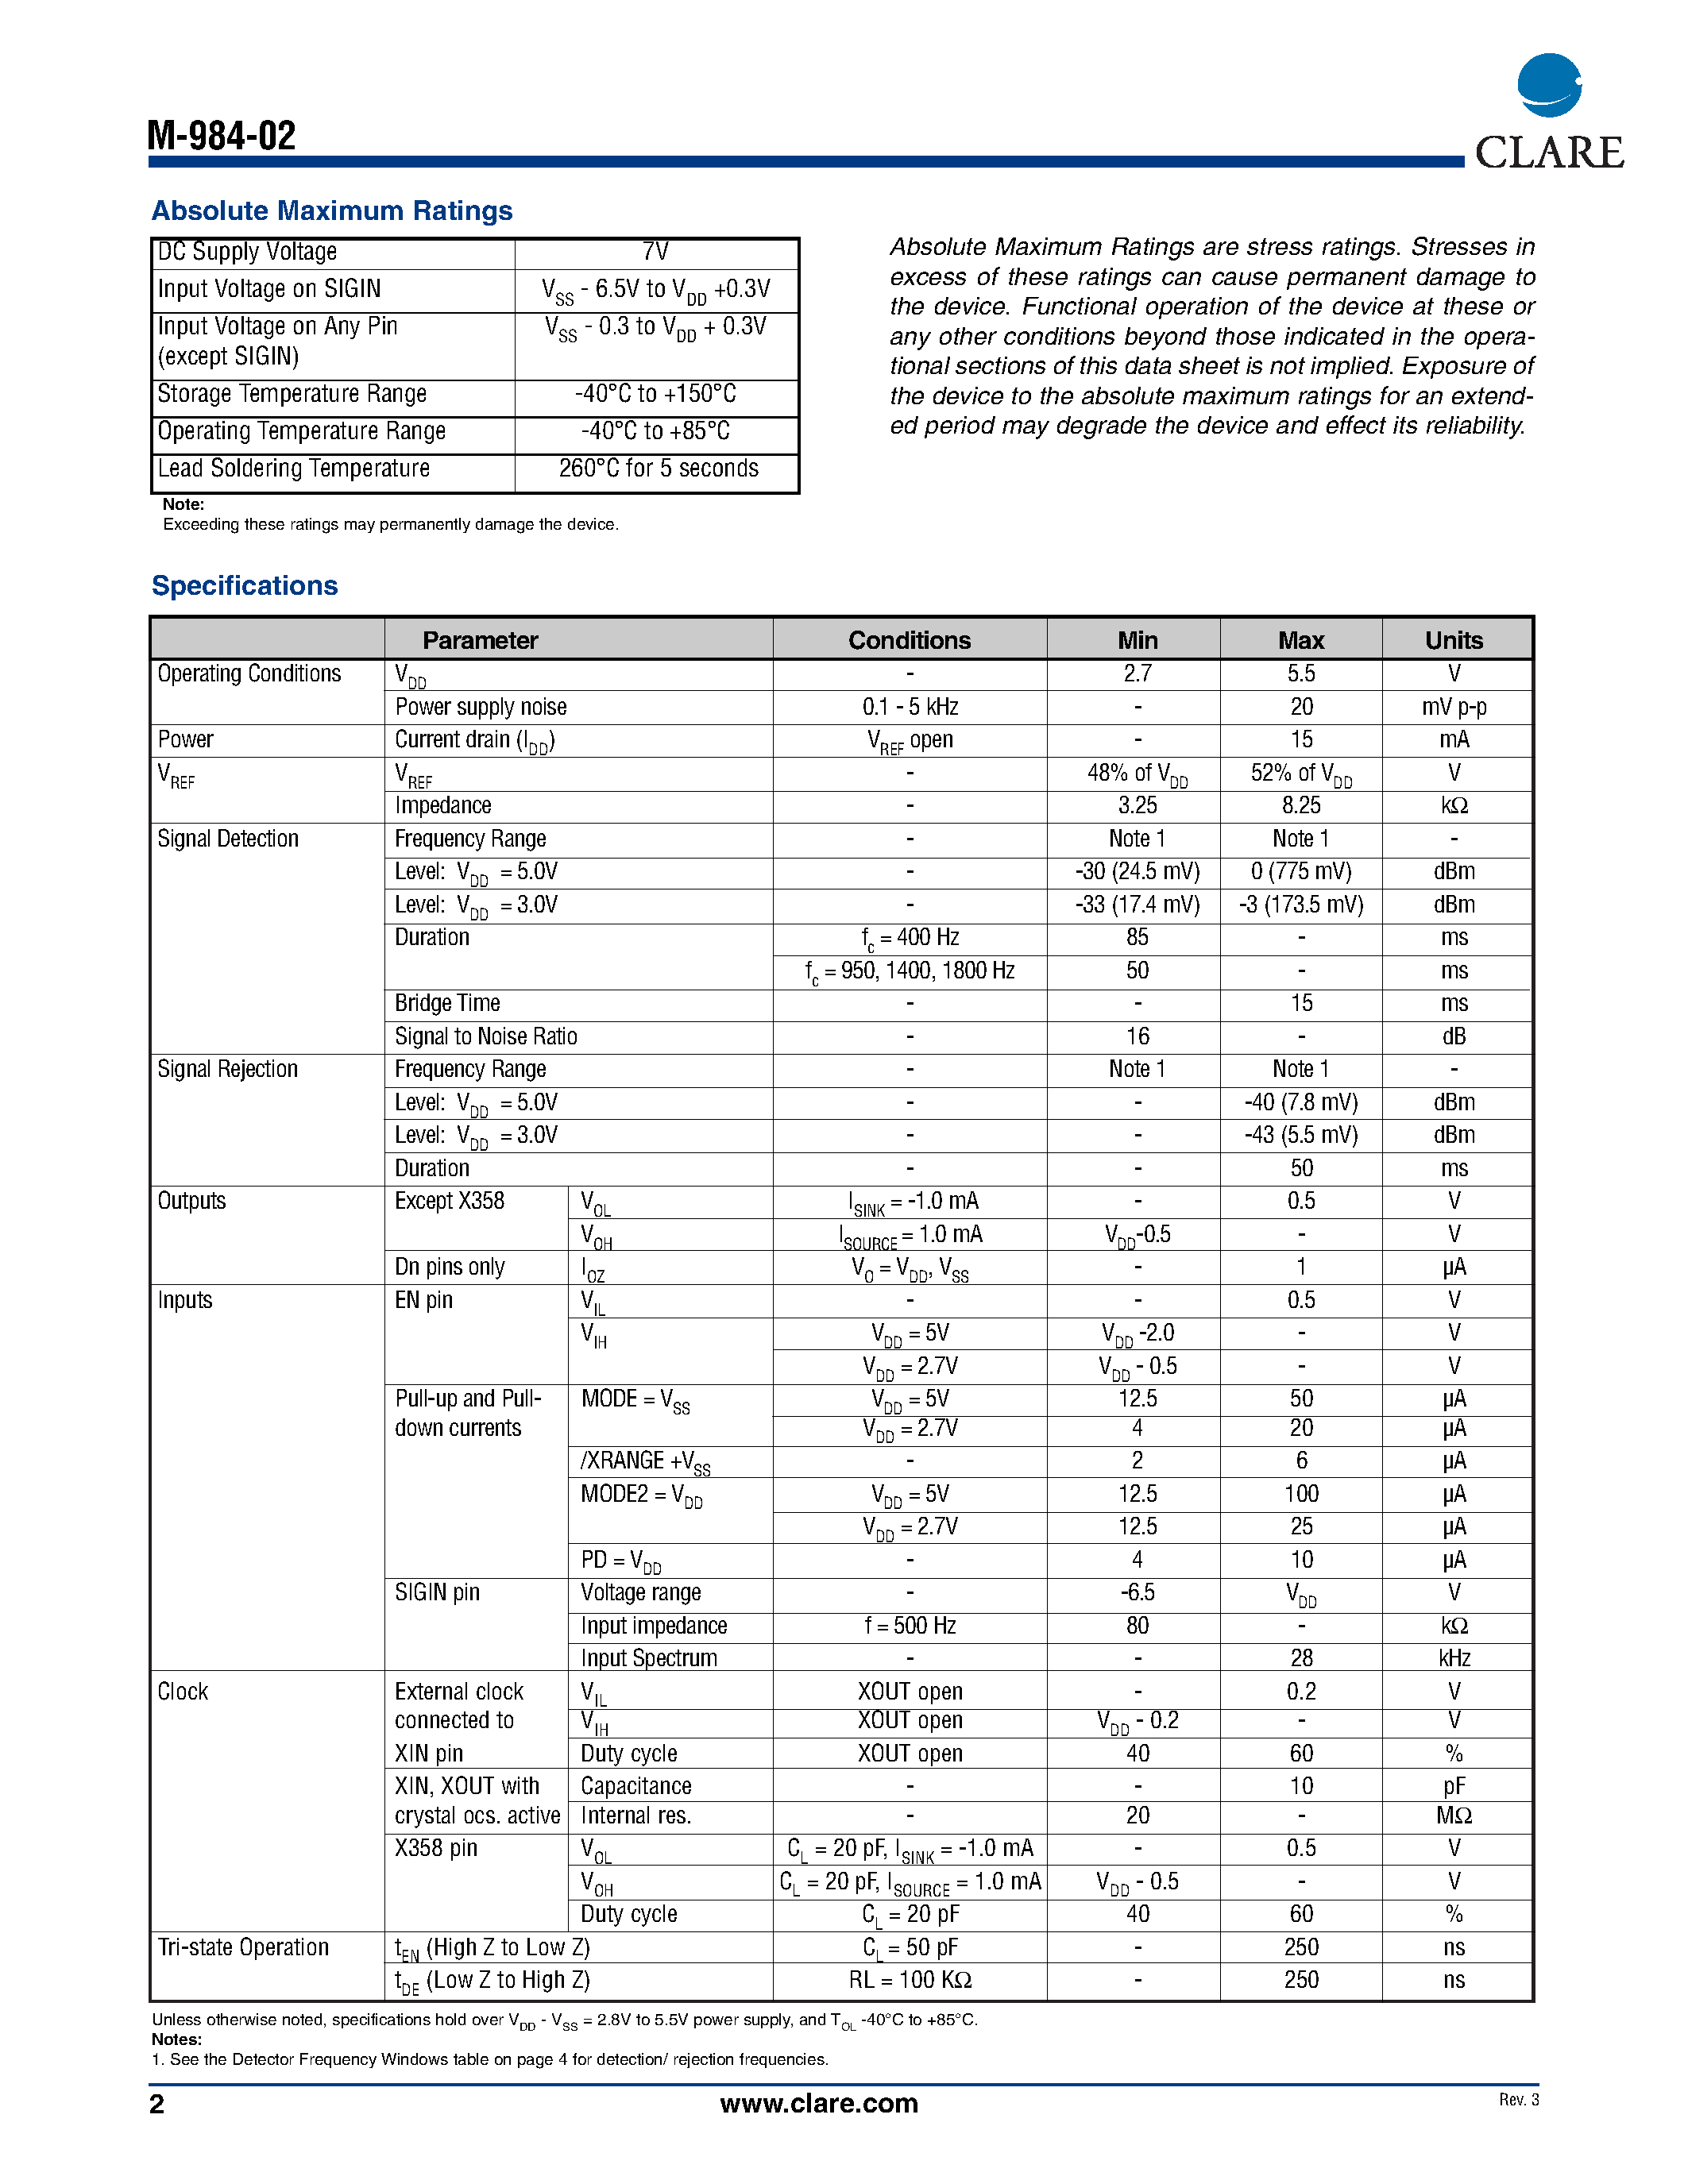 Datasheet M-984-02 - Special Information Tone Detector page 2